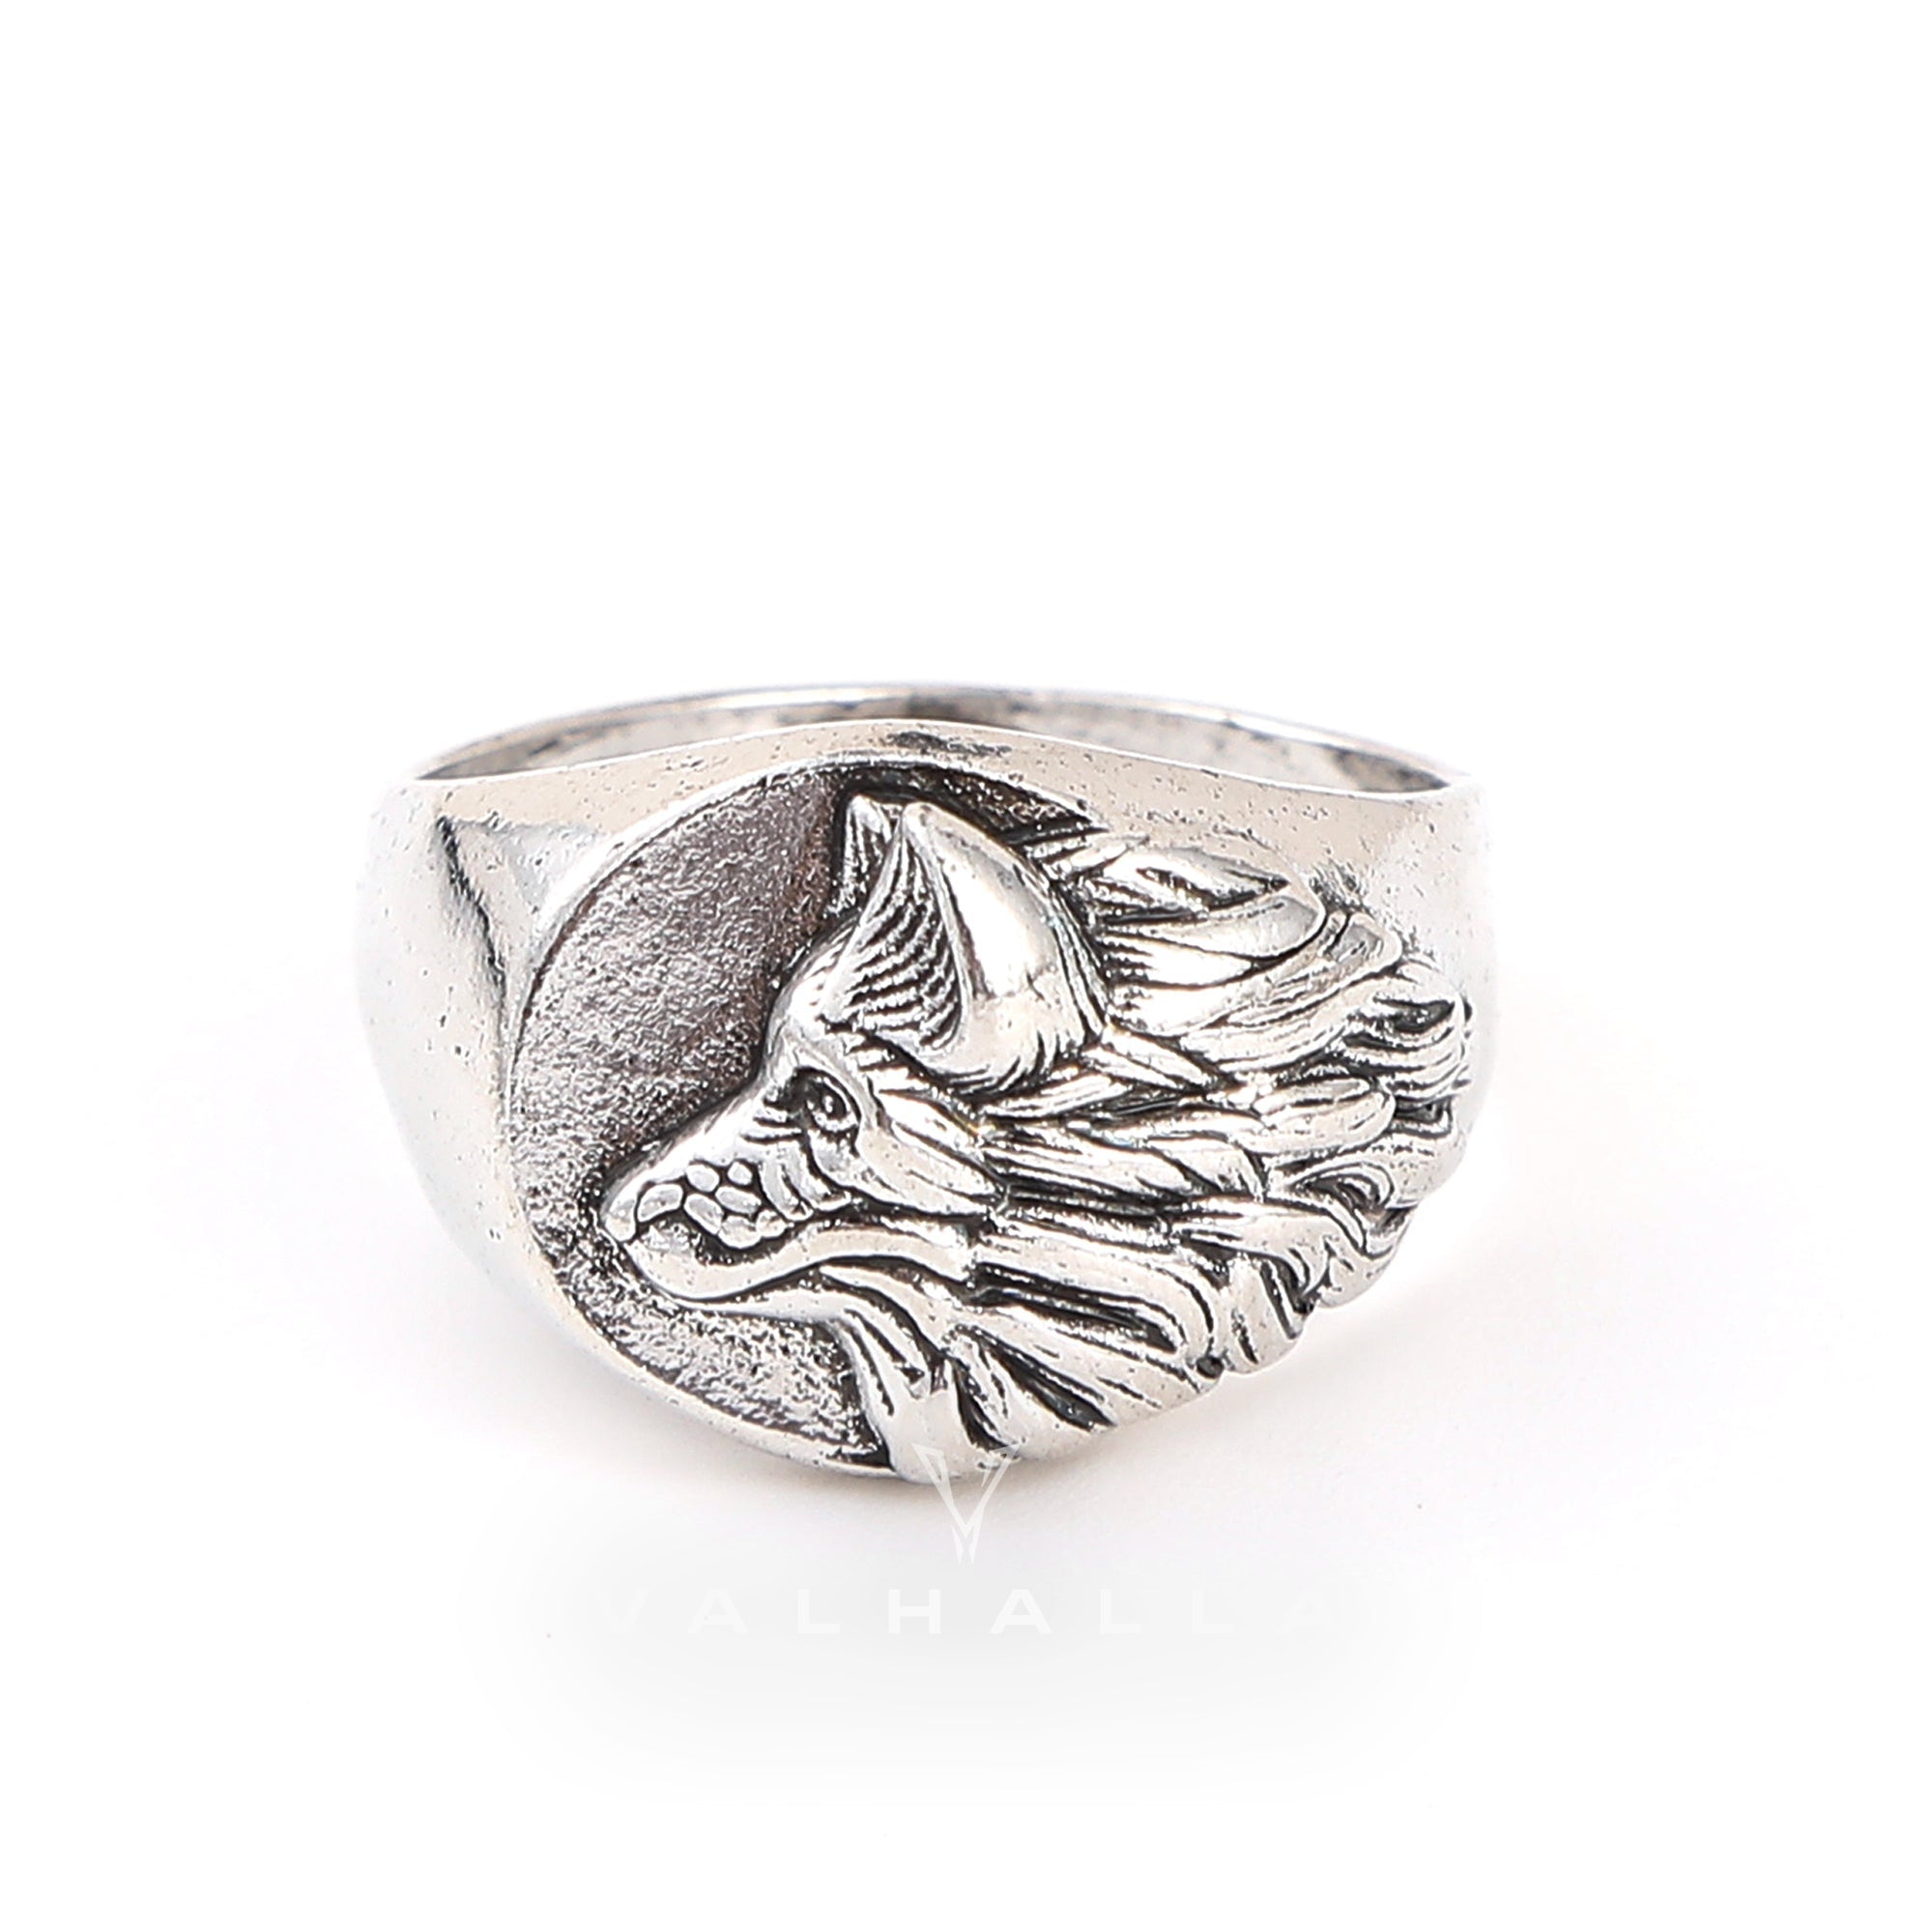 Norse Wolf Stainless Steel Animal Ring